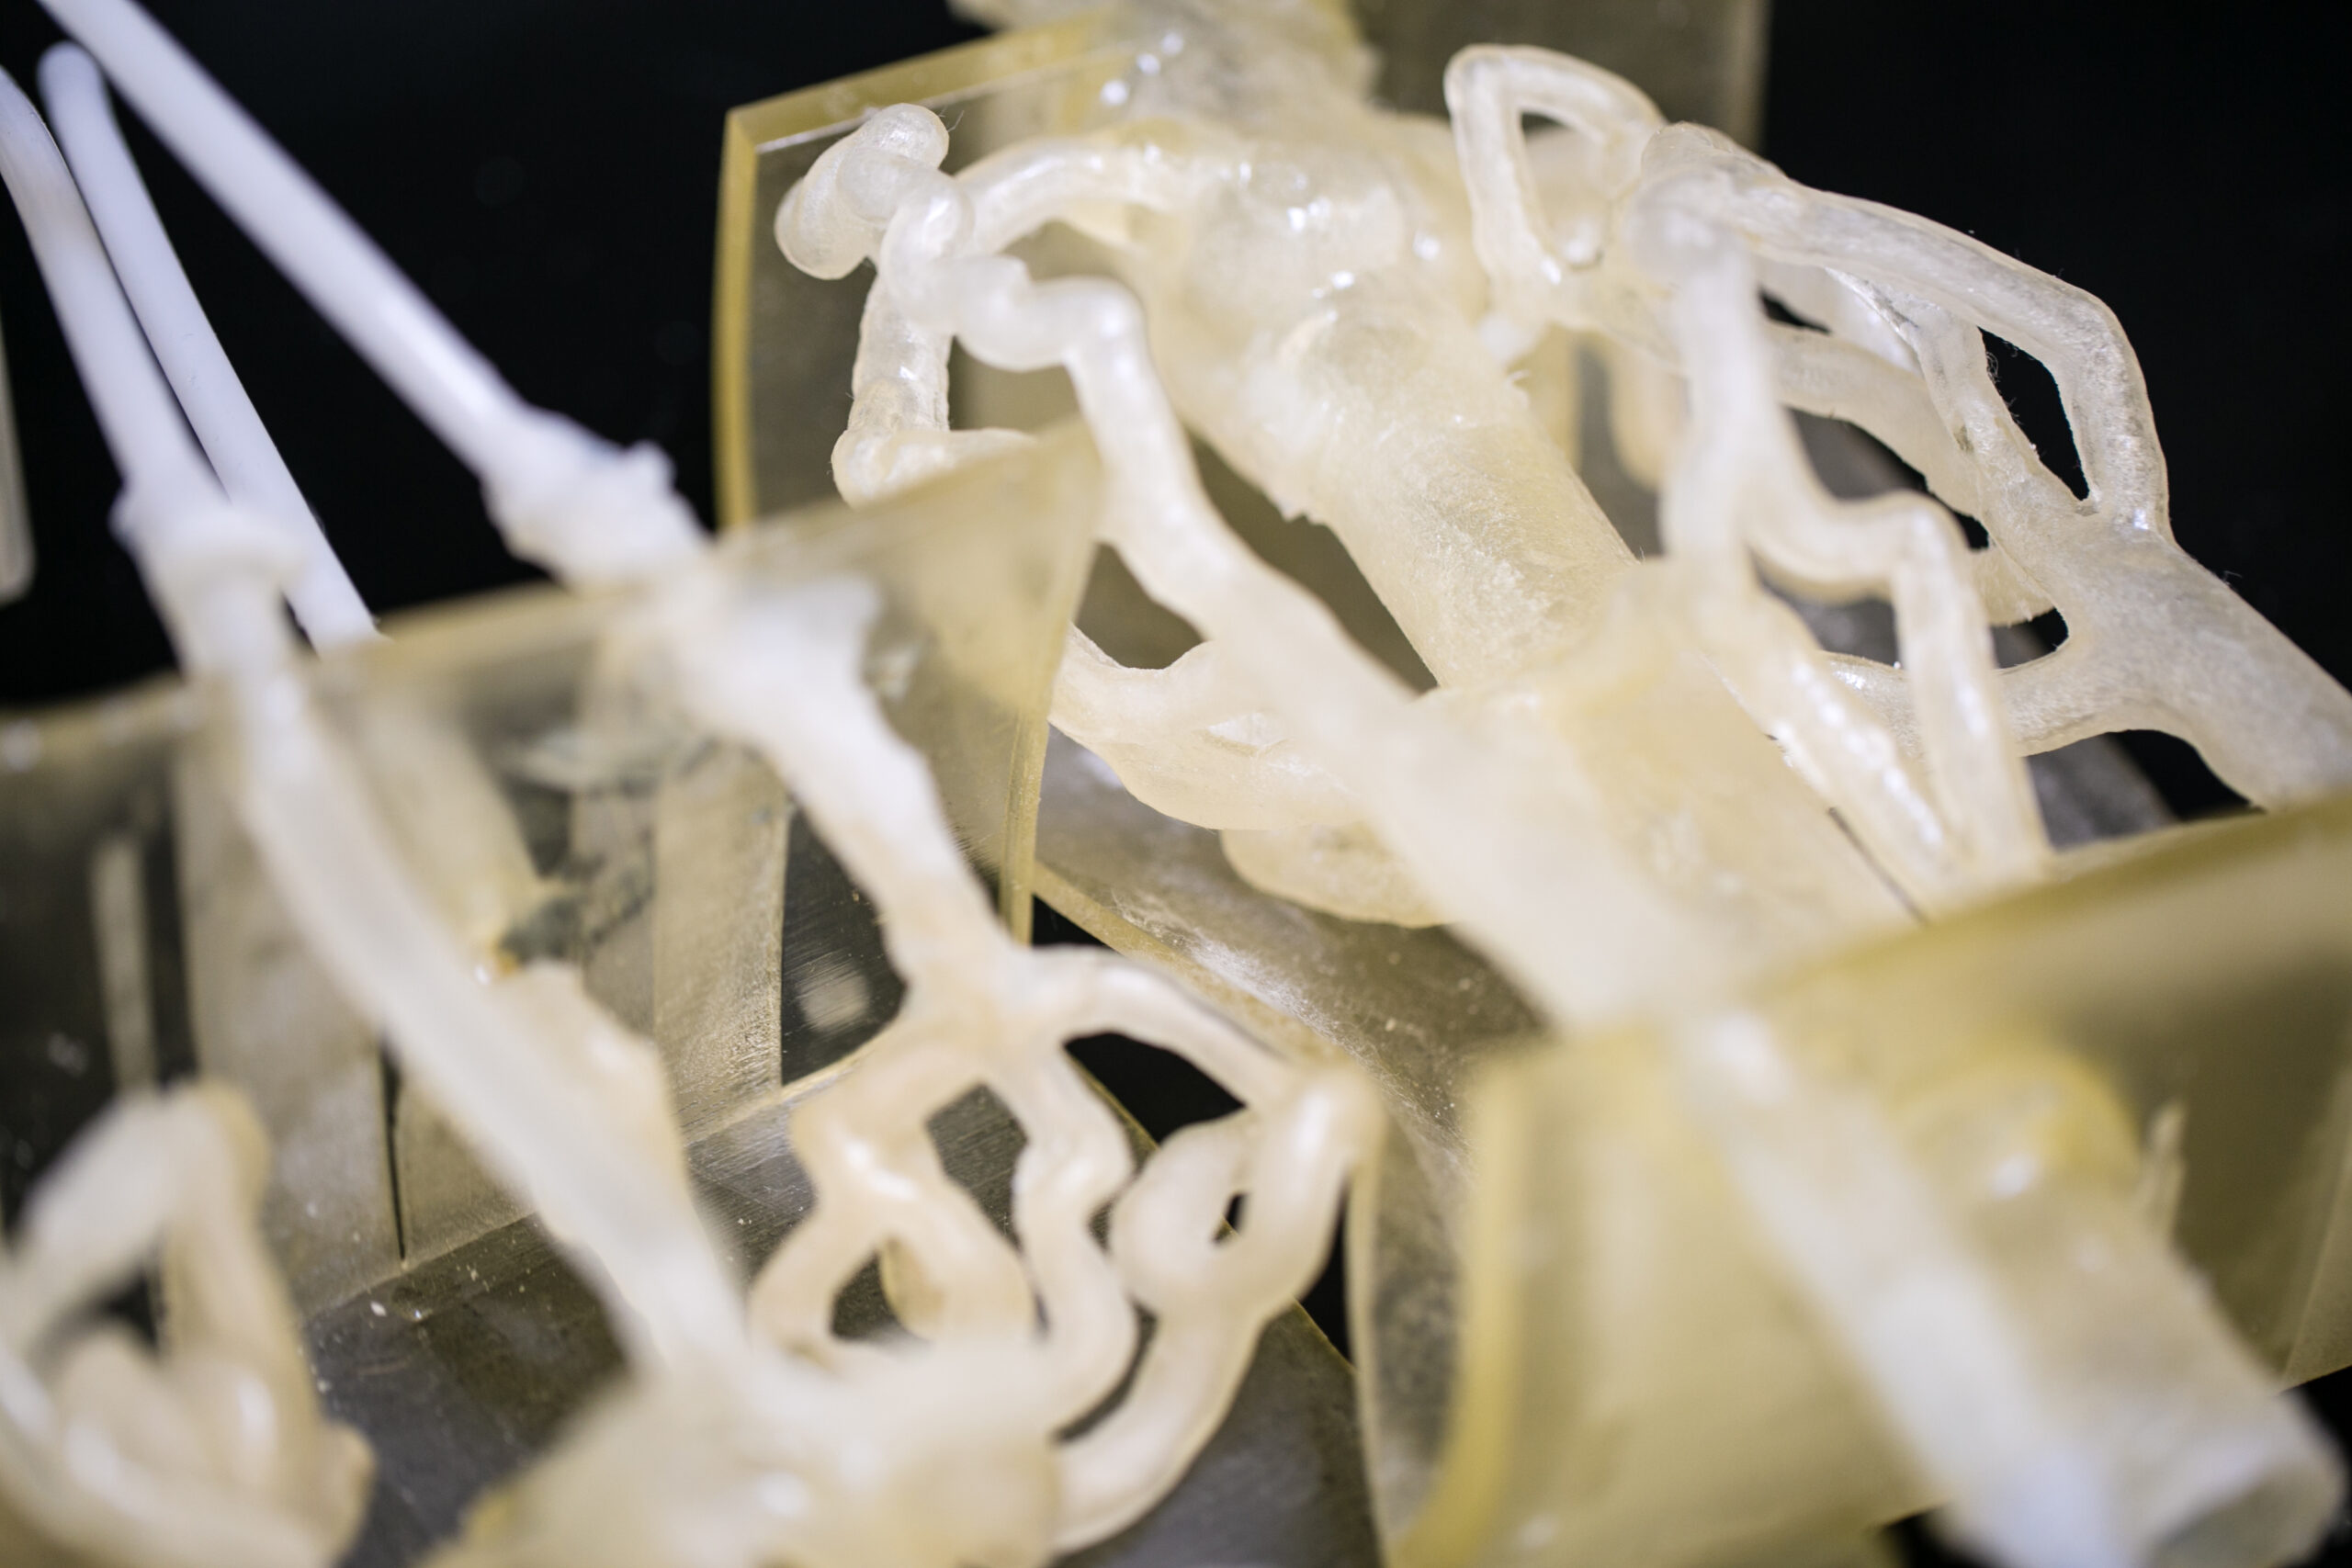 3D printed model for brain aneurysm surgery planning